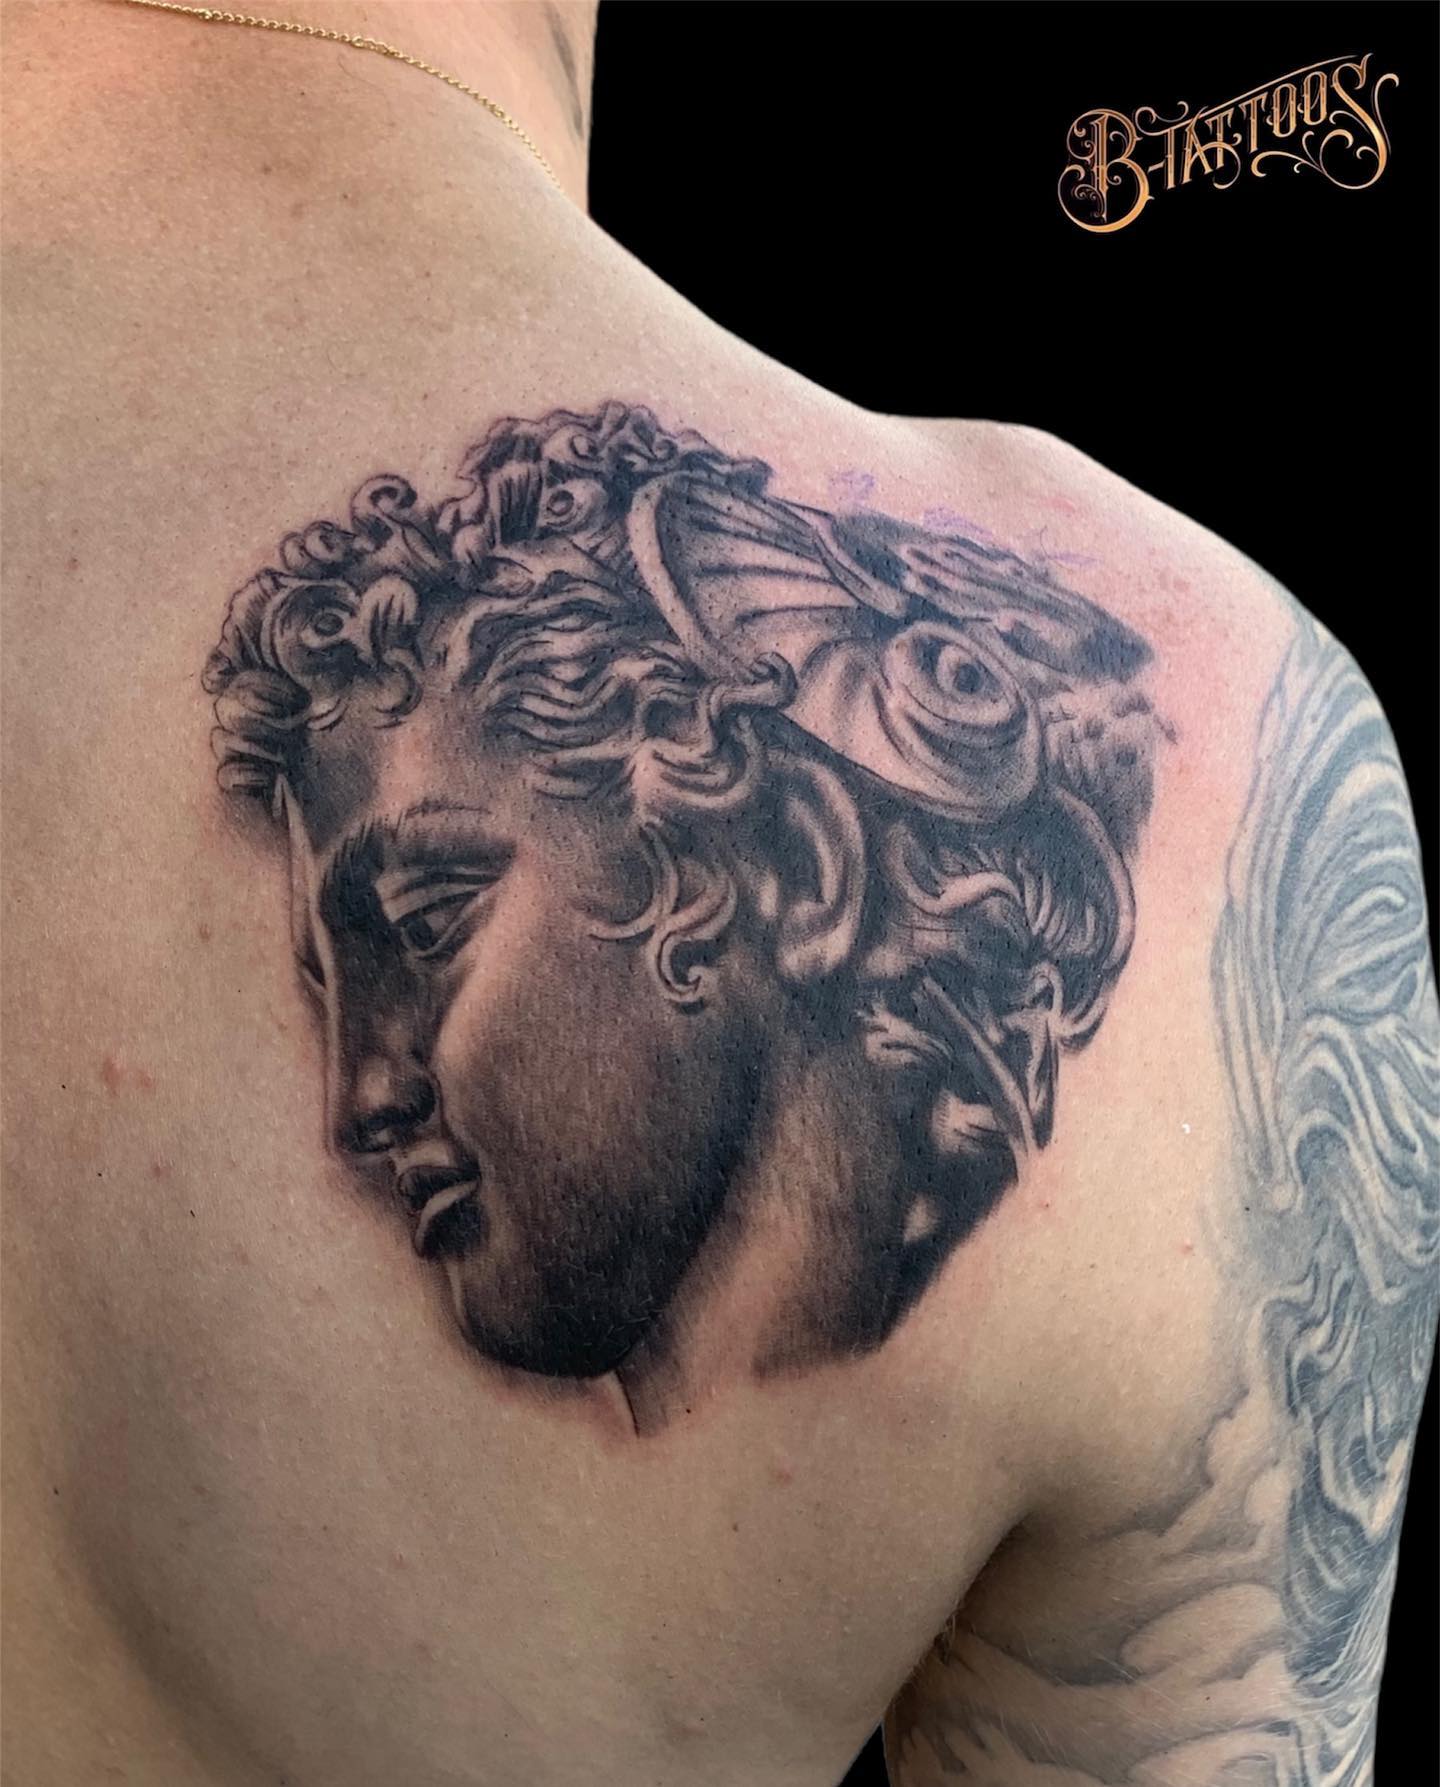 Being one of the most important heroes in Greek mythology, Perseus is worth getting a tattoo.